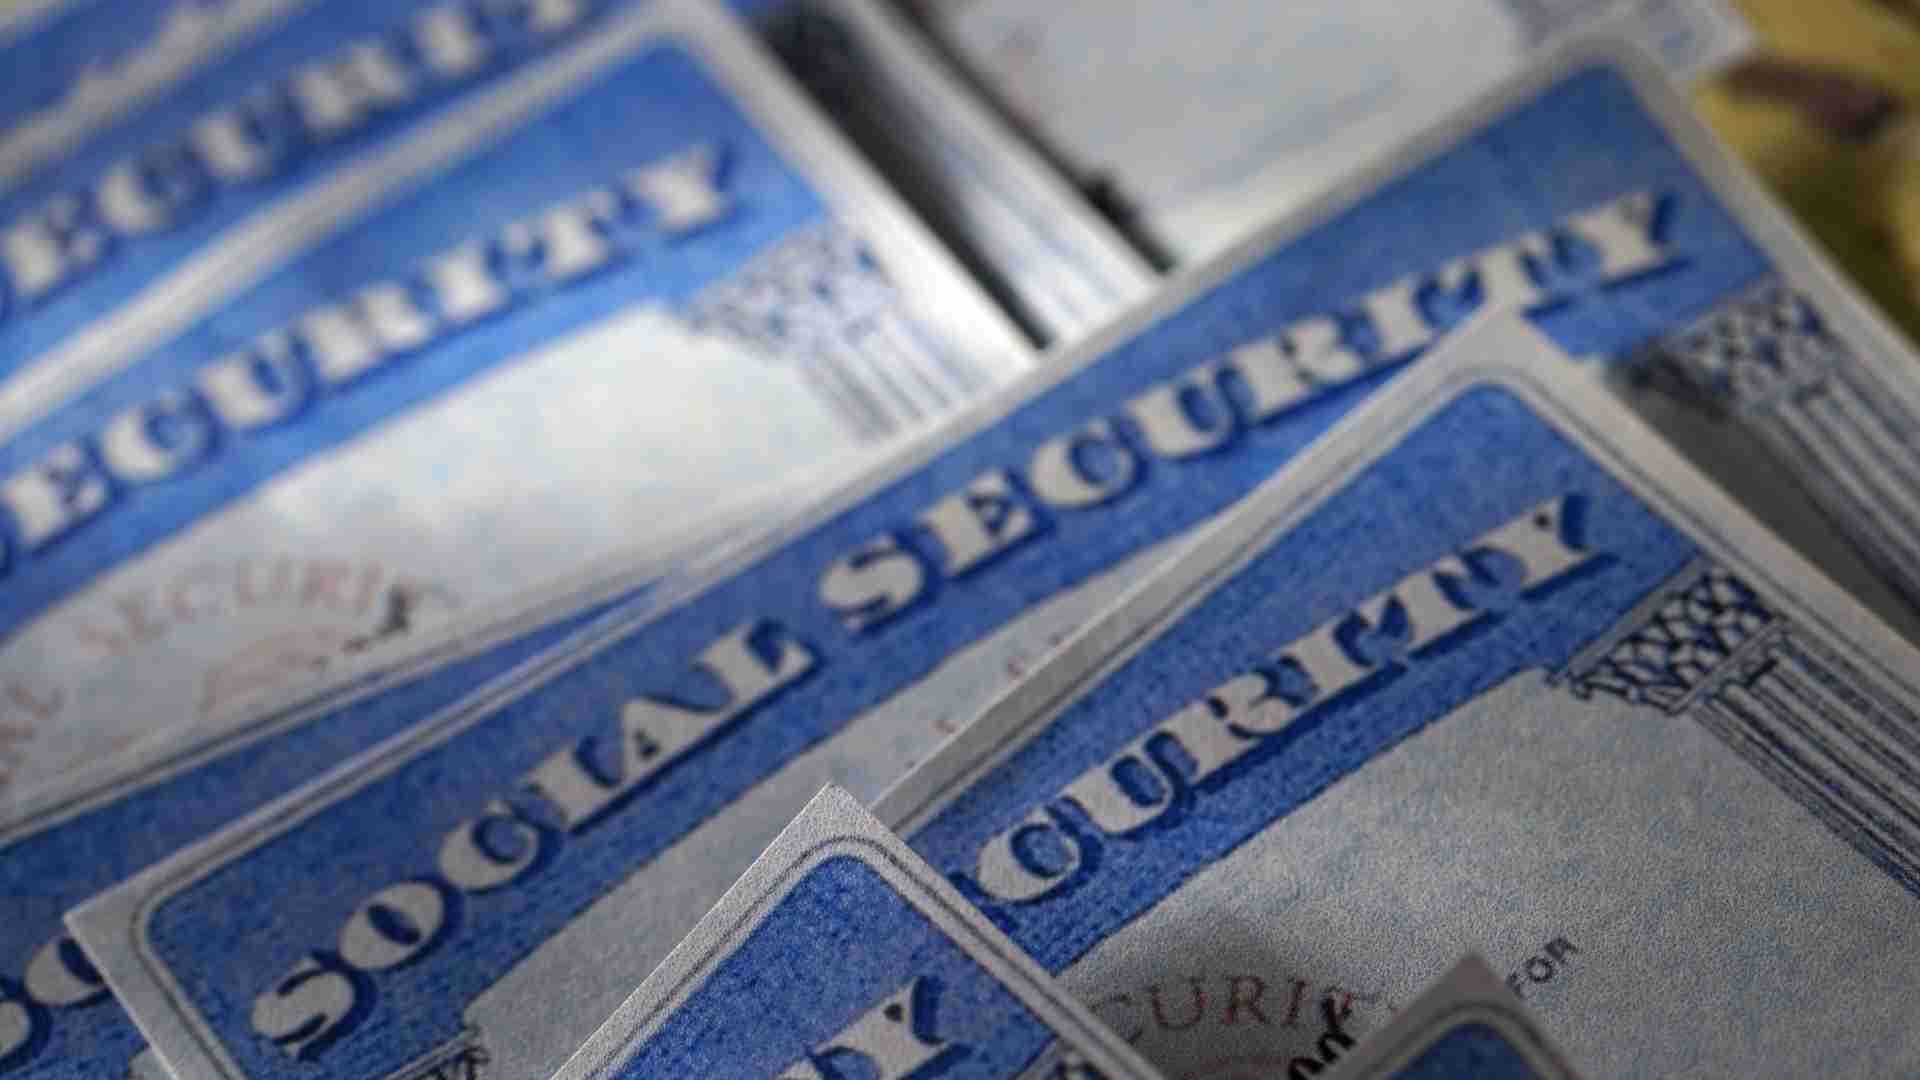 The Social Security Administration has announced who is eligible for the next January 24 payment in the USA